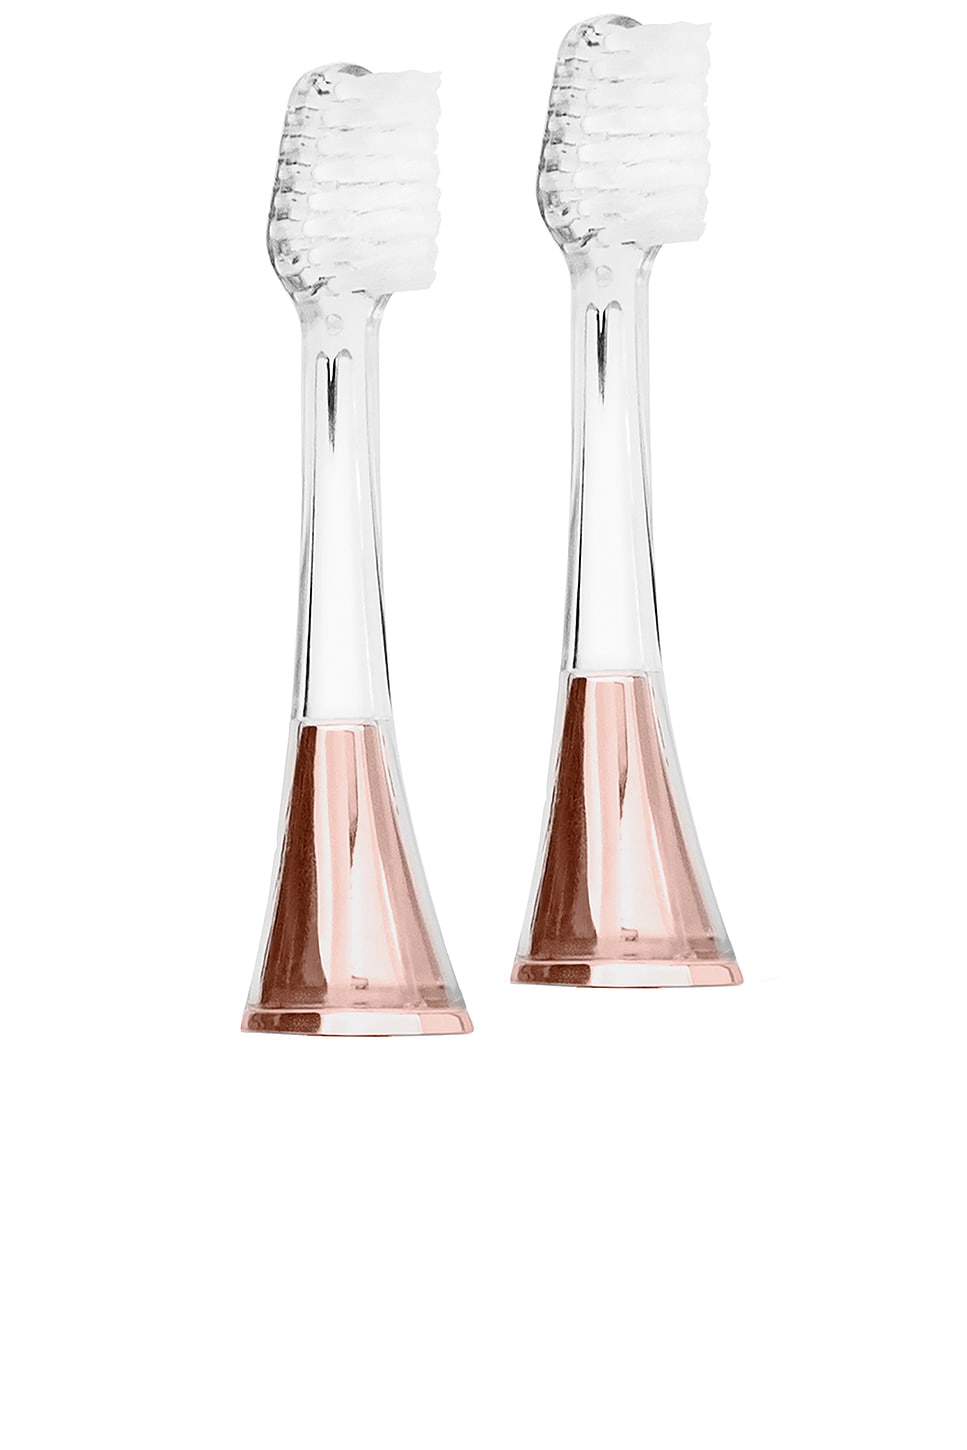 Shop Supersmile Zina45 Sonic Pulse Toothbrush Replacement Heads 2 Pack In Chrome Rose Gold